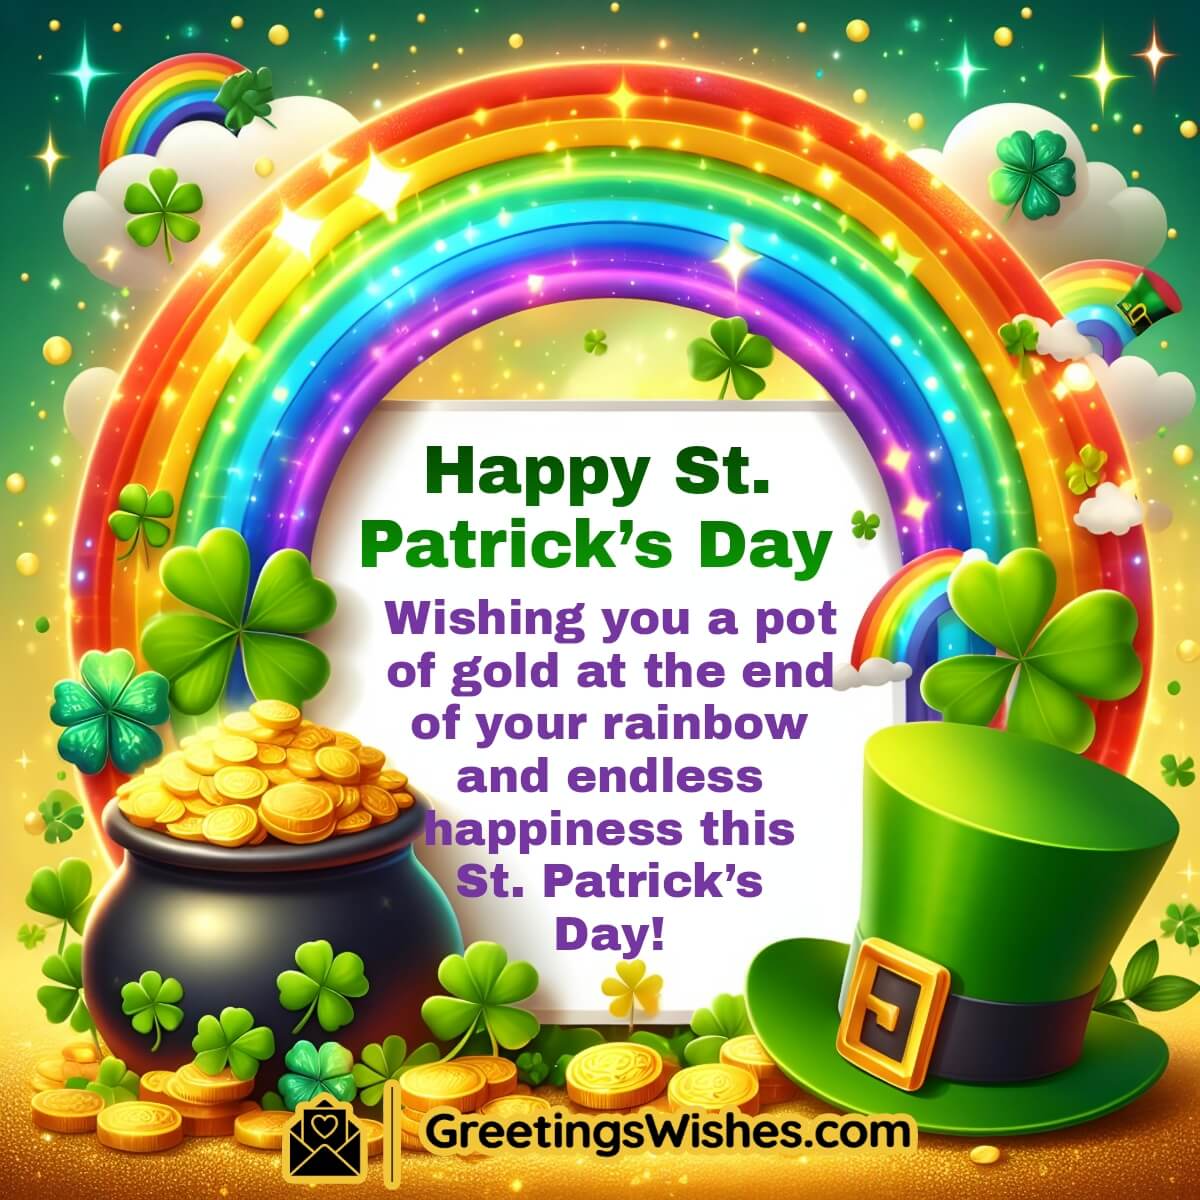 St. Patrick’s Day Wishes